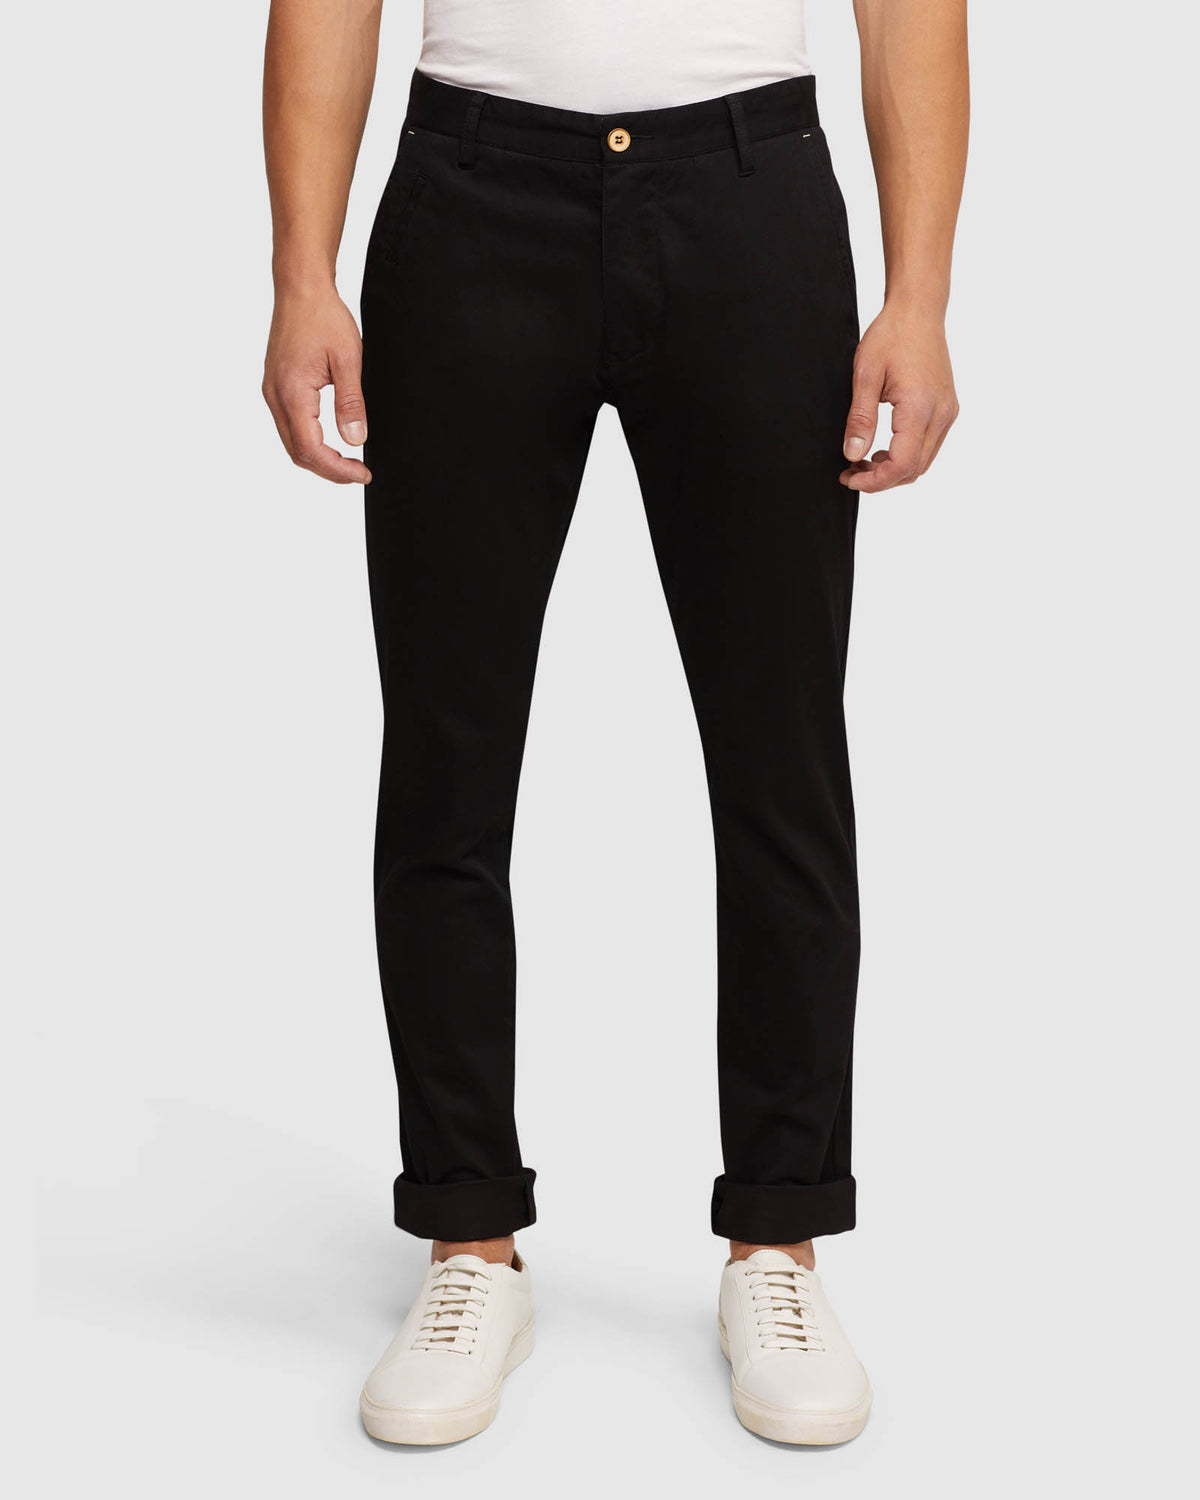 Buy Brown Trousers & Pants for Men by Marks & Spencer Online | Ajio.com